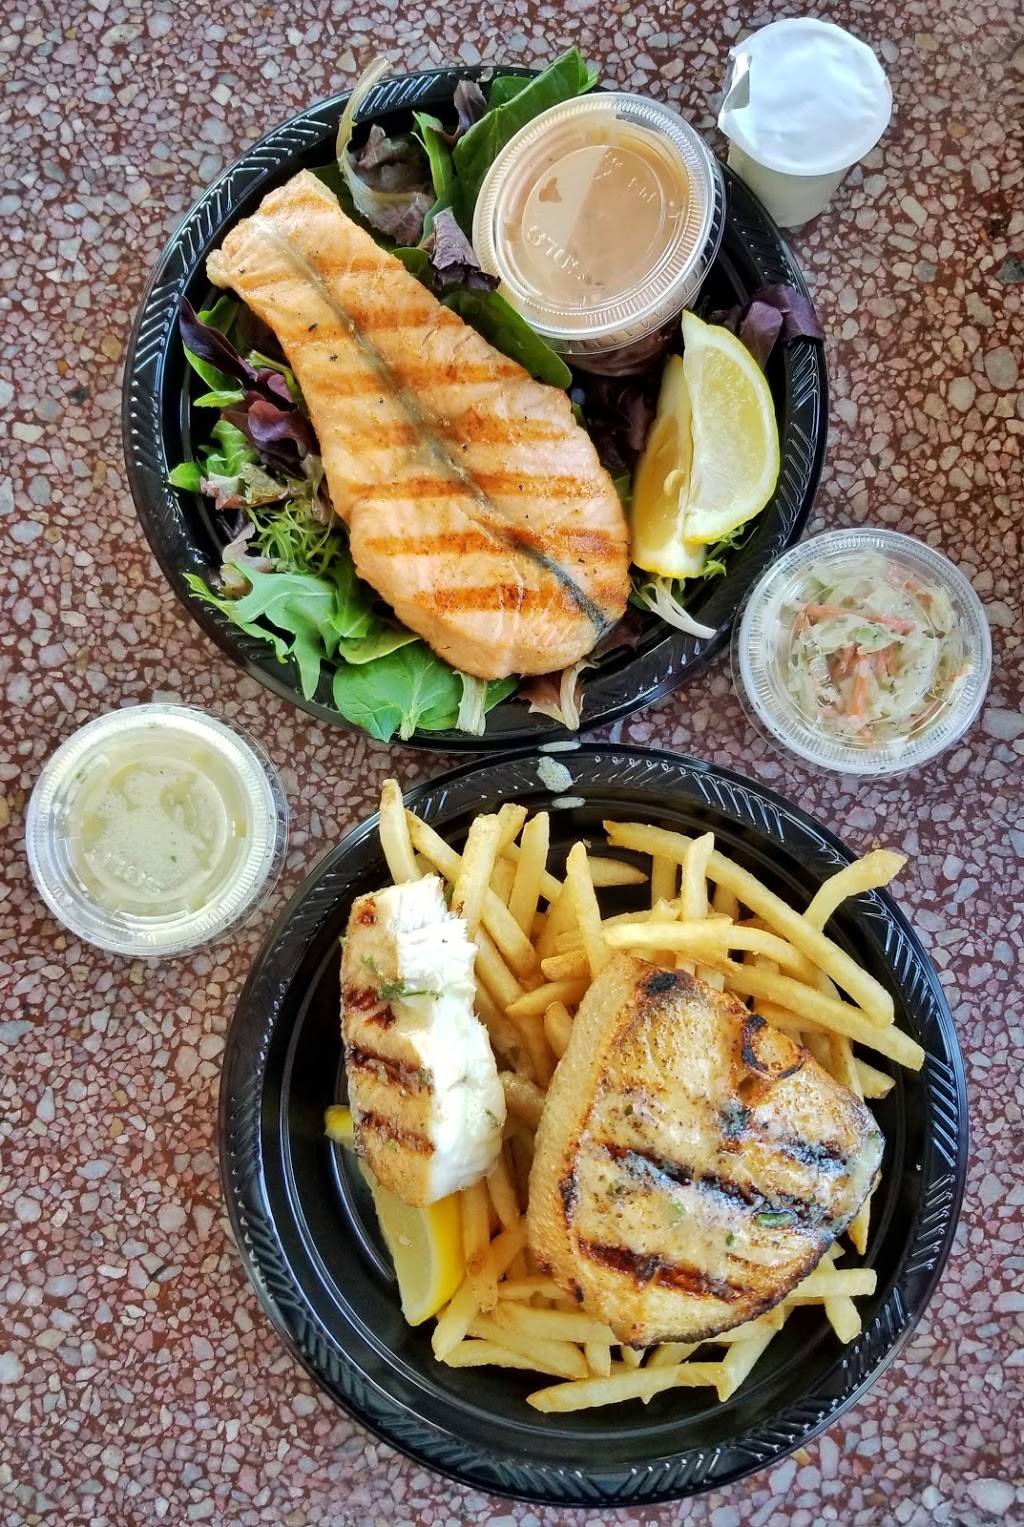 Fishermans Outlet | restaurant | 529 S Central Ave, Los Angeles, CA 90013, USA | 2136277231 OR +1 213-627-7231